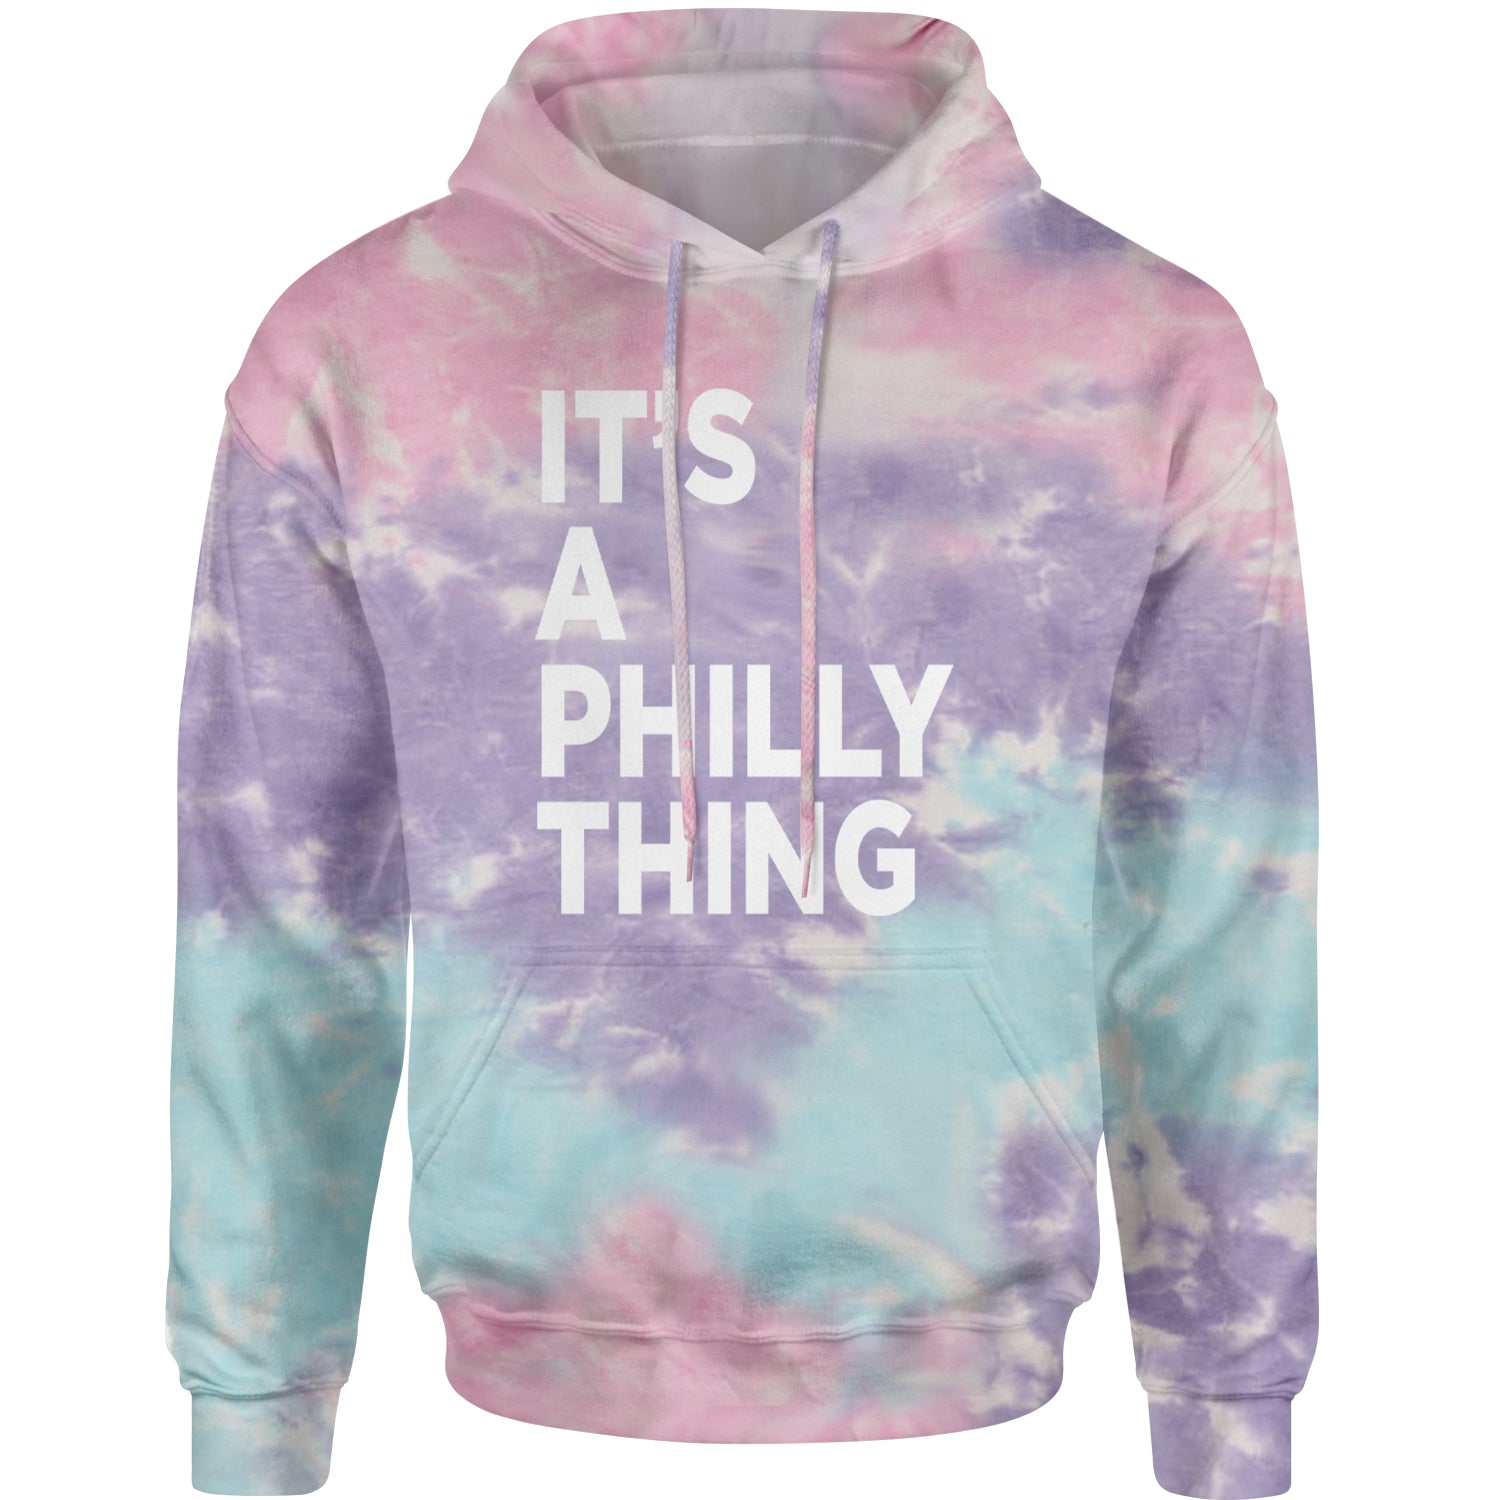 PHILLY It's A Philly Thing Adult Hoodie Sweatshirt baseball, dilly, filly, football, jawn, morgan, Philadelphia, philli by Expression Tees